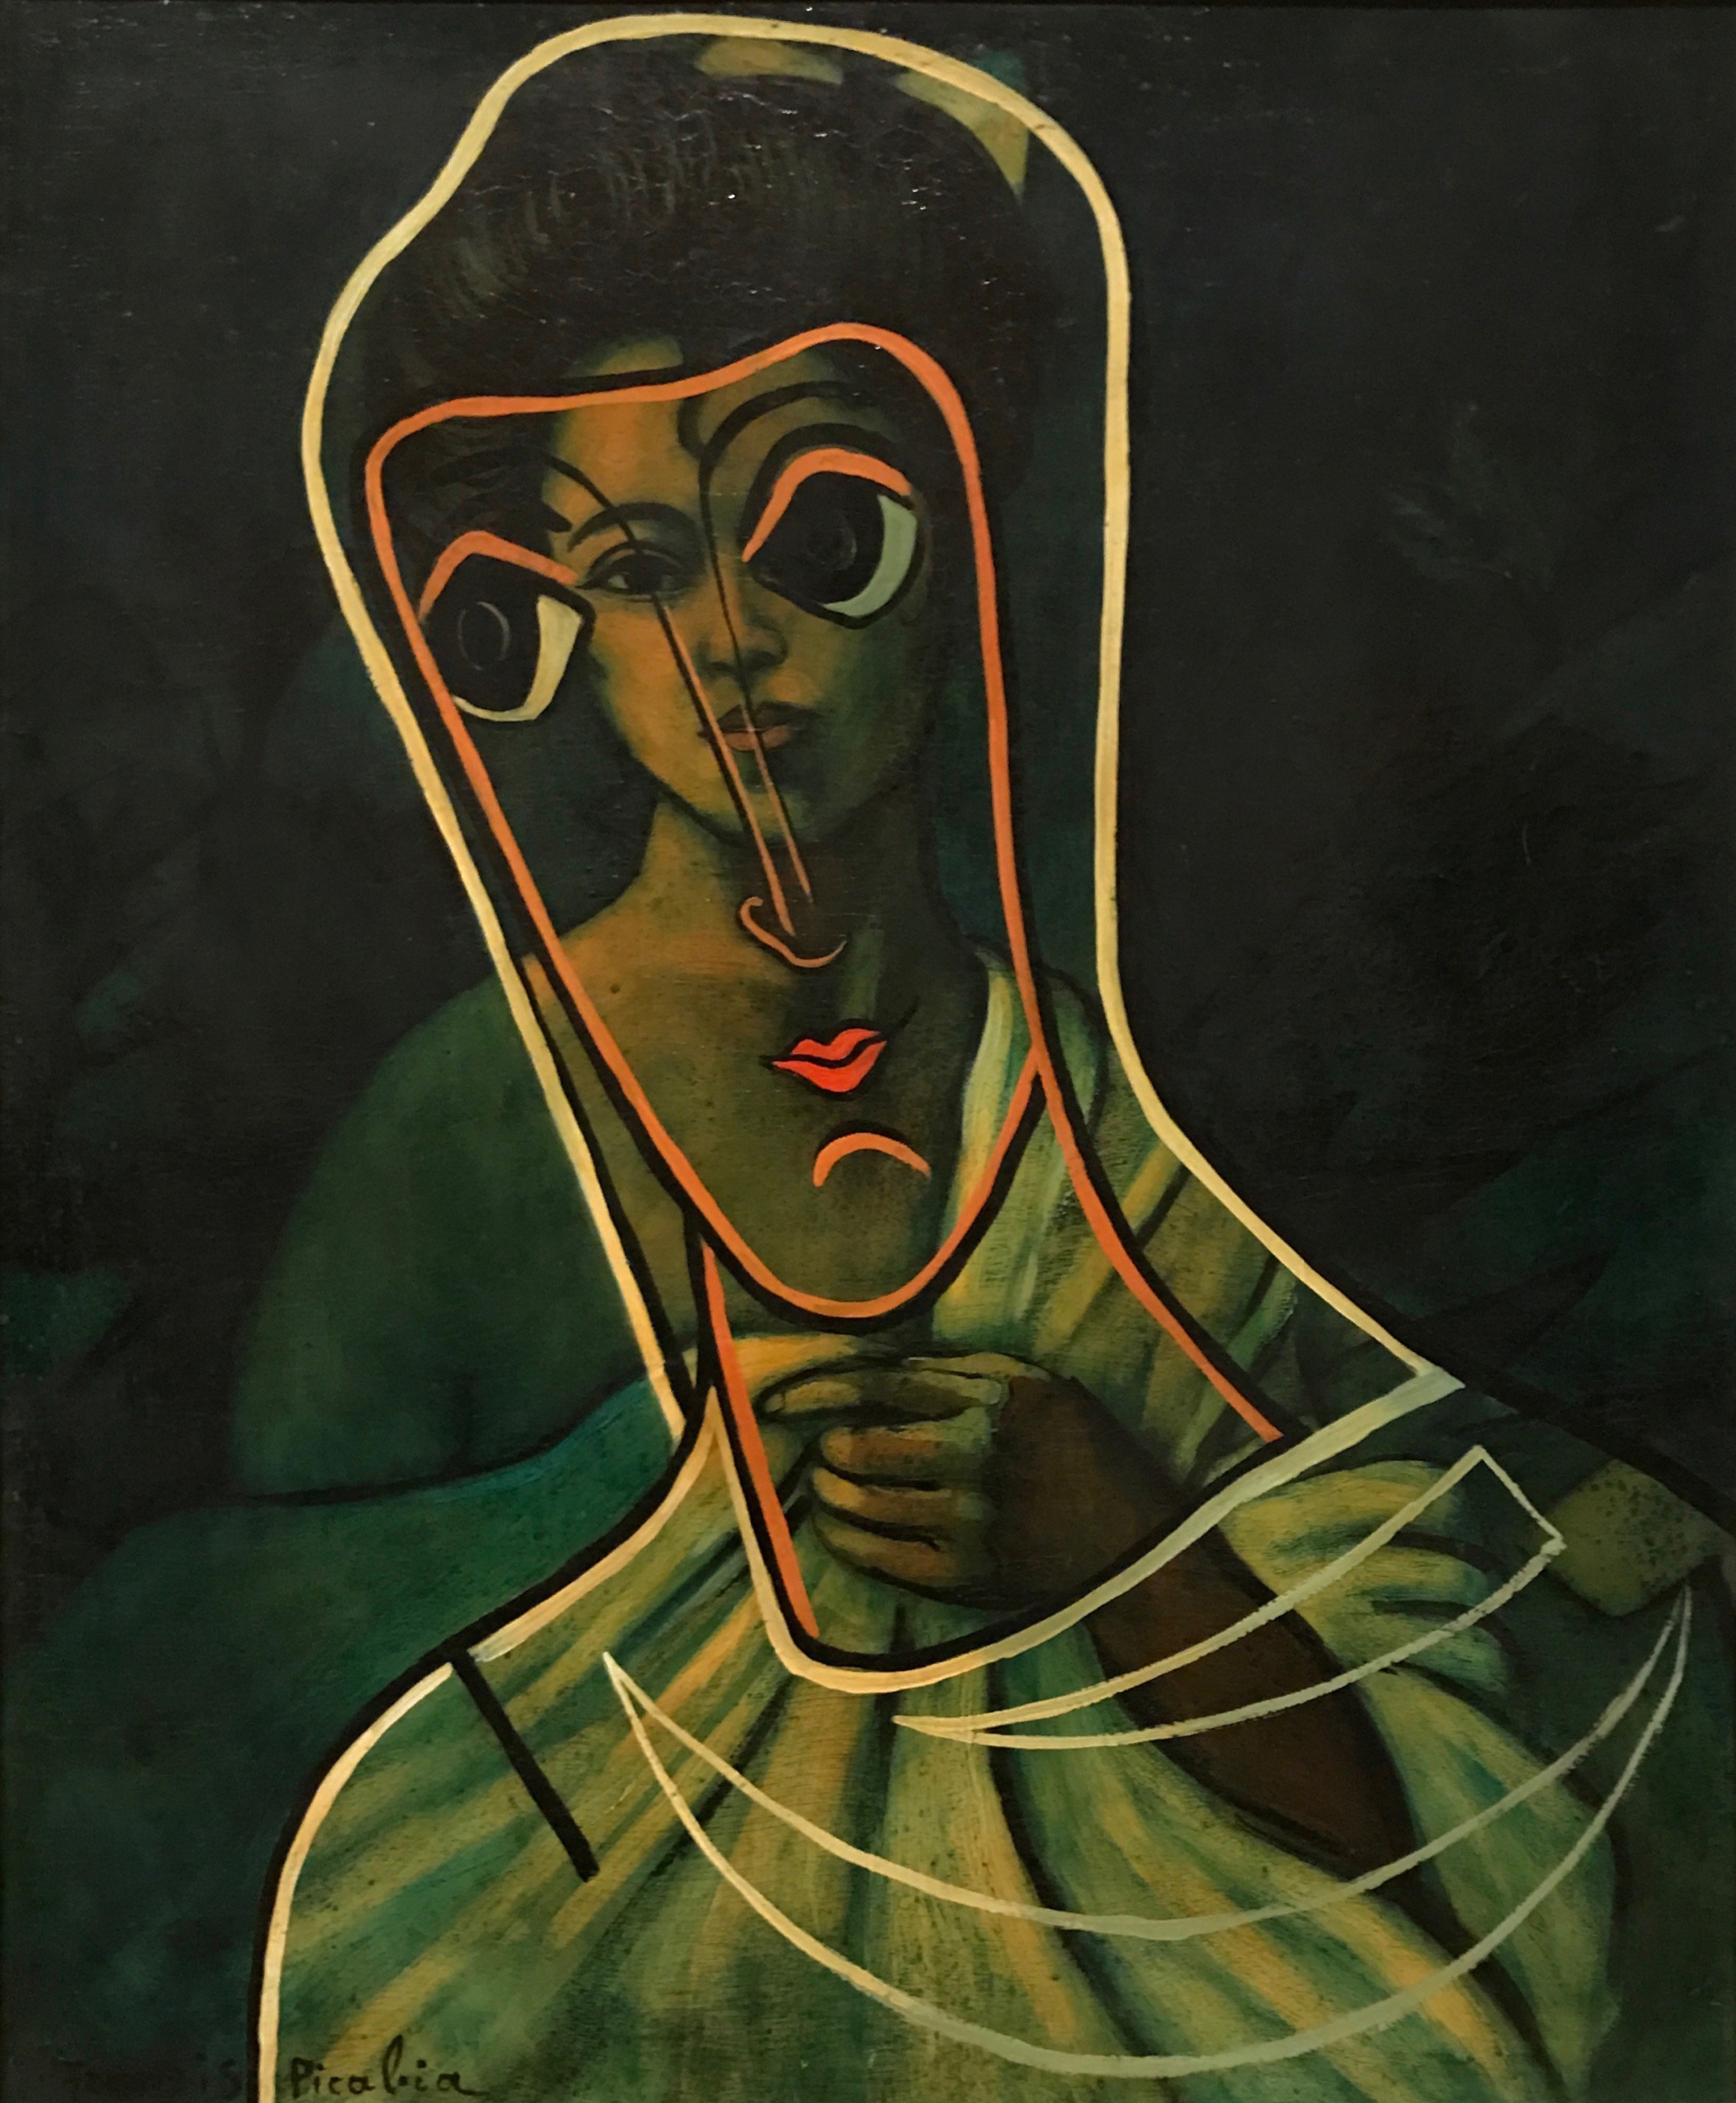 Francis Picabia
Femme et visage (Woman and Face), c. 1935&amp;ndash;38
oil and enamel paint on wood
33 7/16 x 27 9/16 inches
(85 x 70 cm)
Private&amp;nbsp;Collection